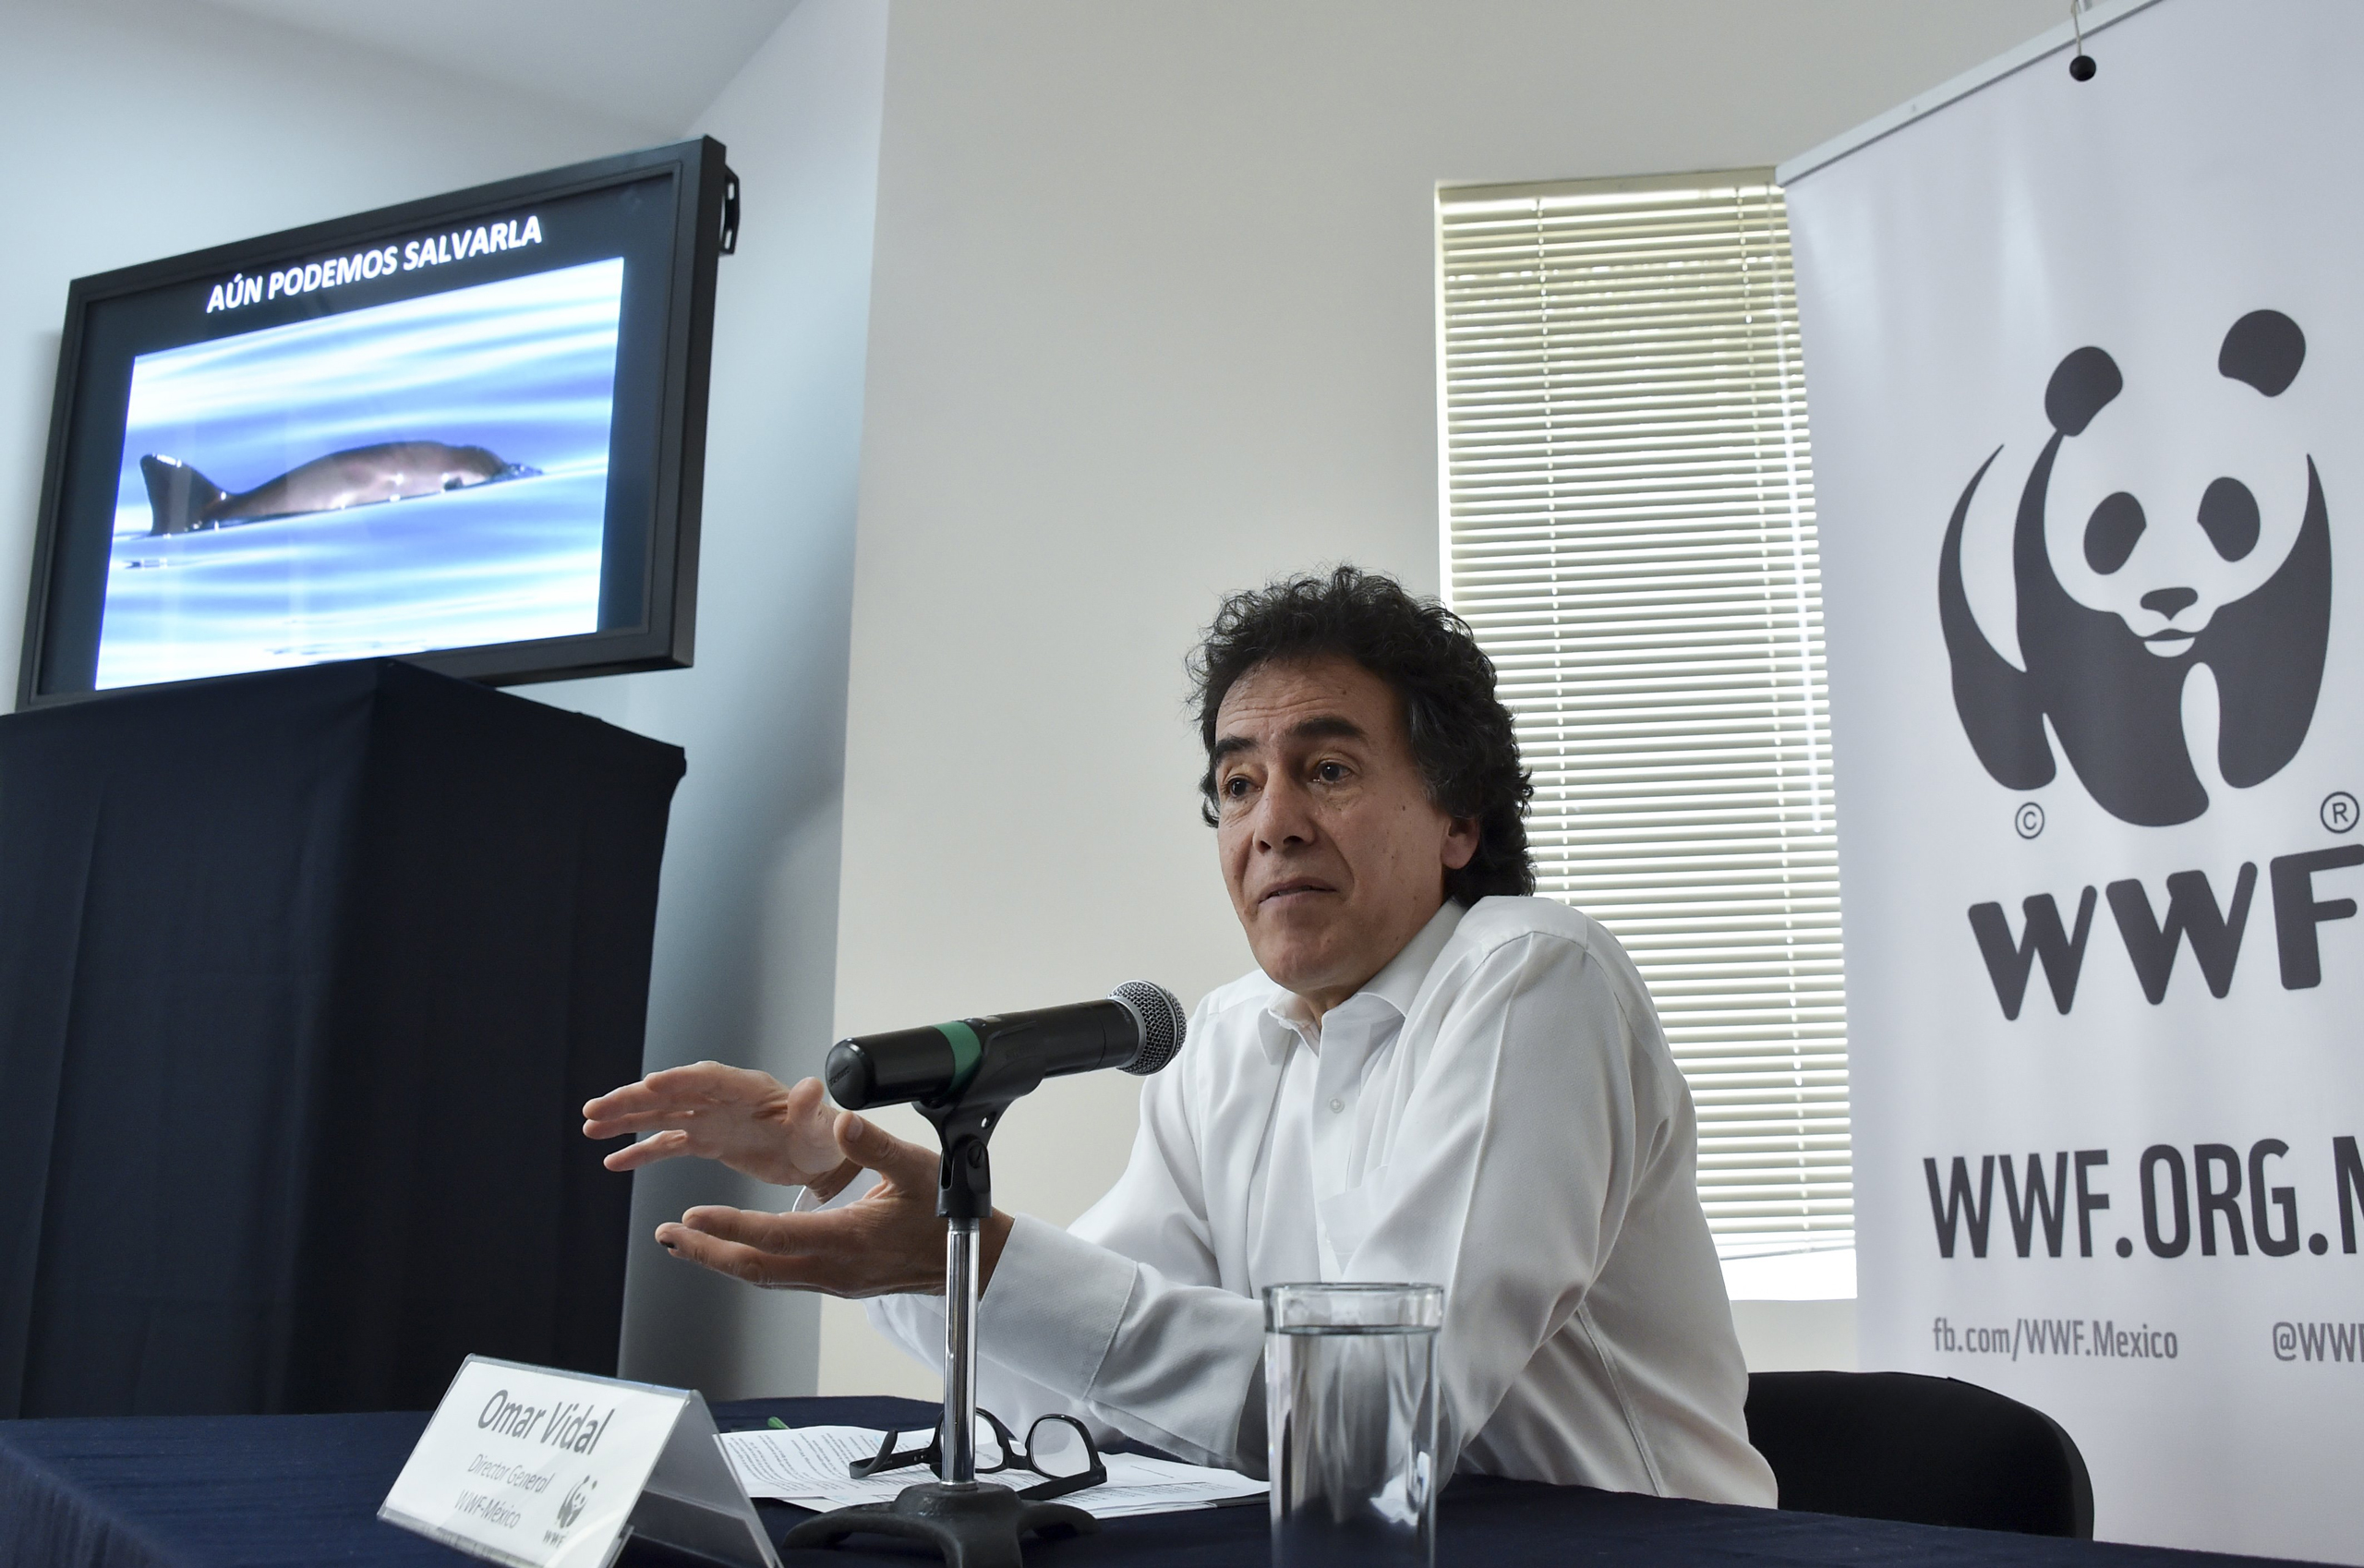 Mexico's General Director of World Wide Fund for Nature (WWF) Omar Vidal speaks during a press conference next to the image of a "vaquita marina" (Phocoena sinus) on a screen, in Mexico City on May 16, 2016. (Yuri Cortez—AFP/Getty Images)